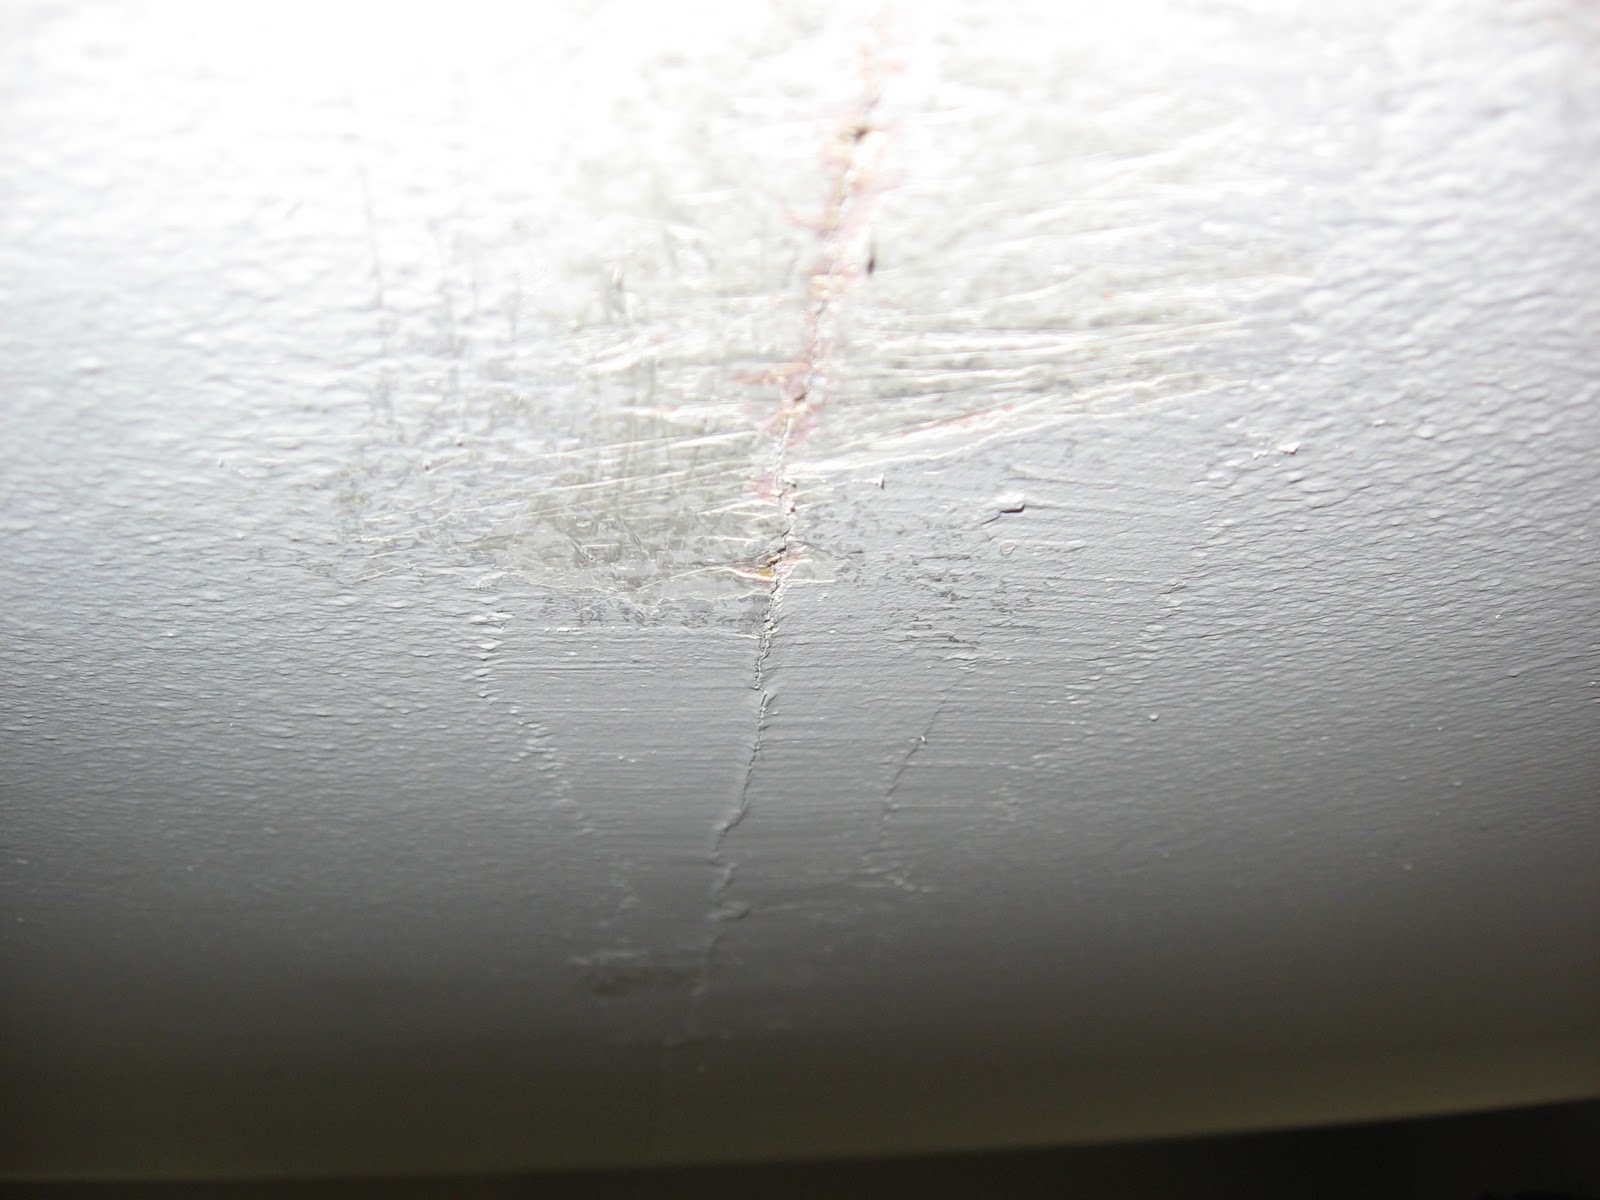 Plaster Repair How To Patching A Failed Ceiling Drywall Seam